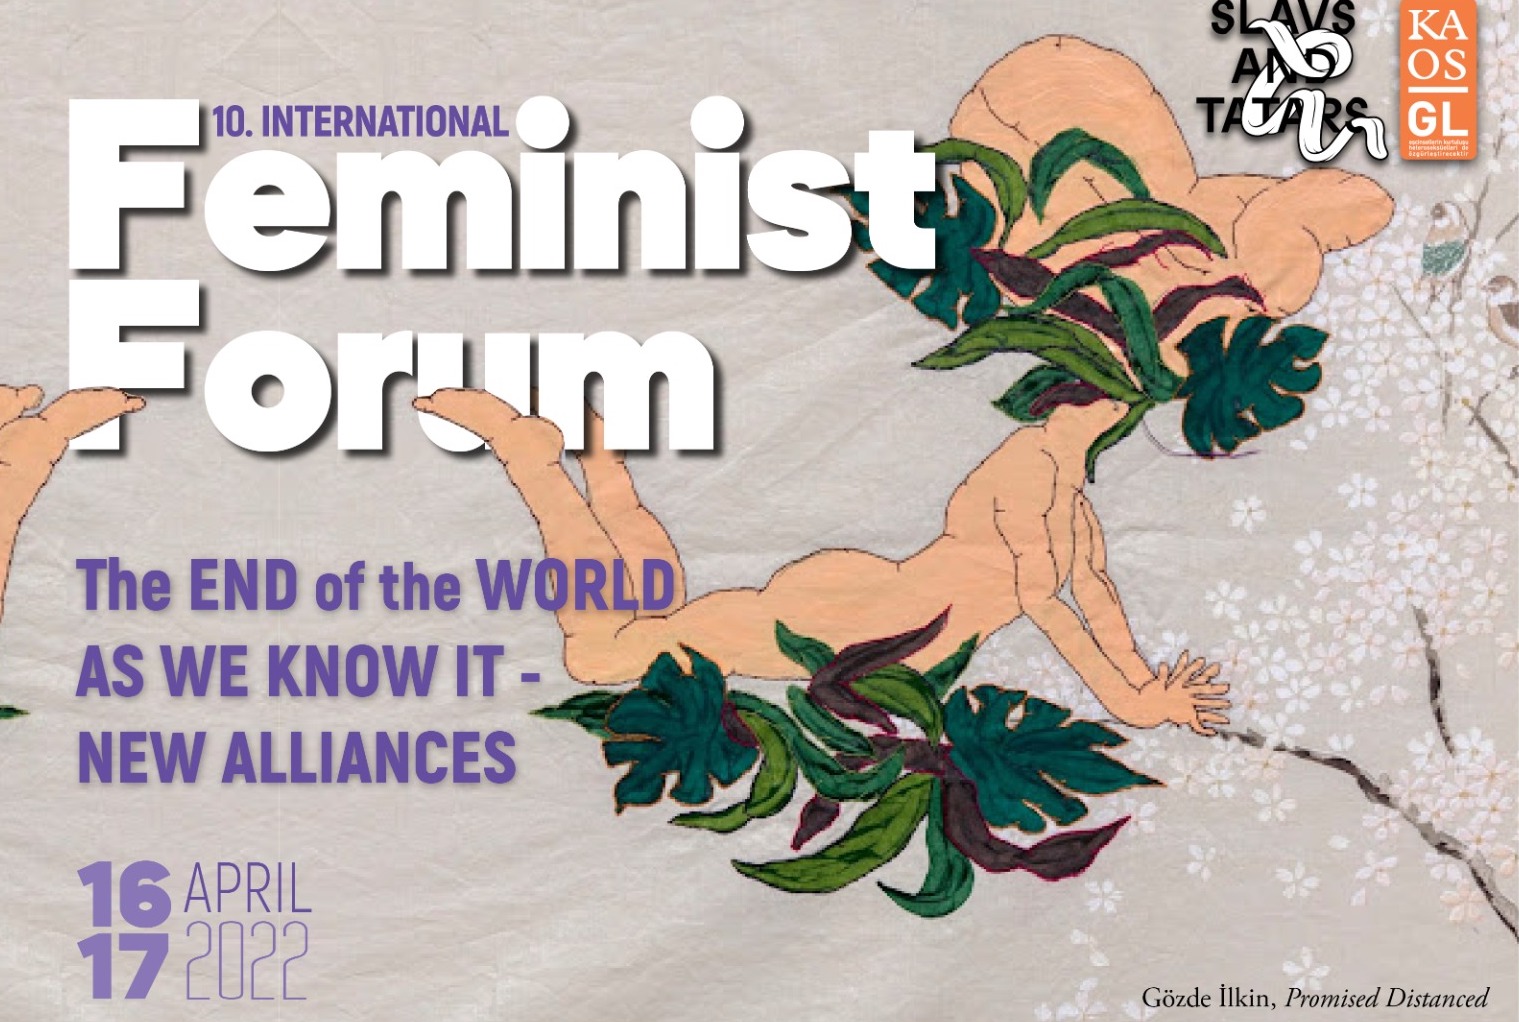 Invitation to Feminist Forum: Please join us to imagine such a world together | Kaos GL - News Portal for LGBTI+